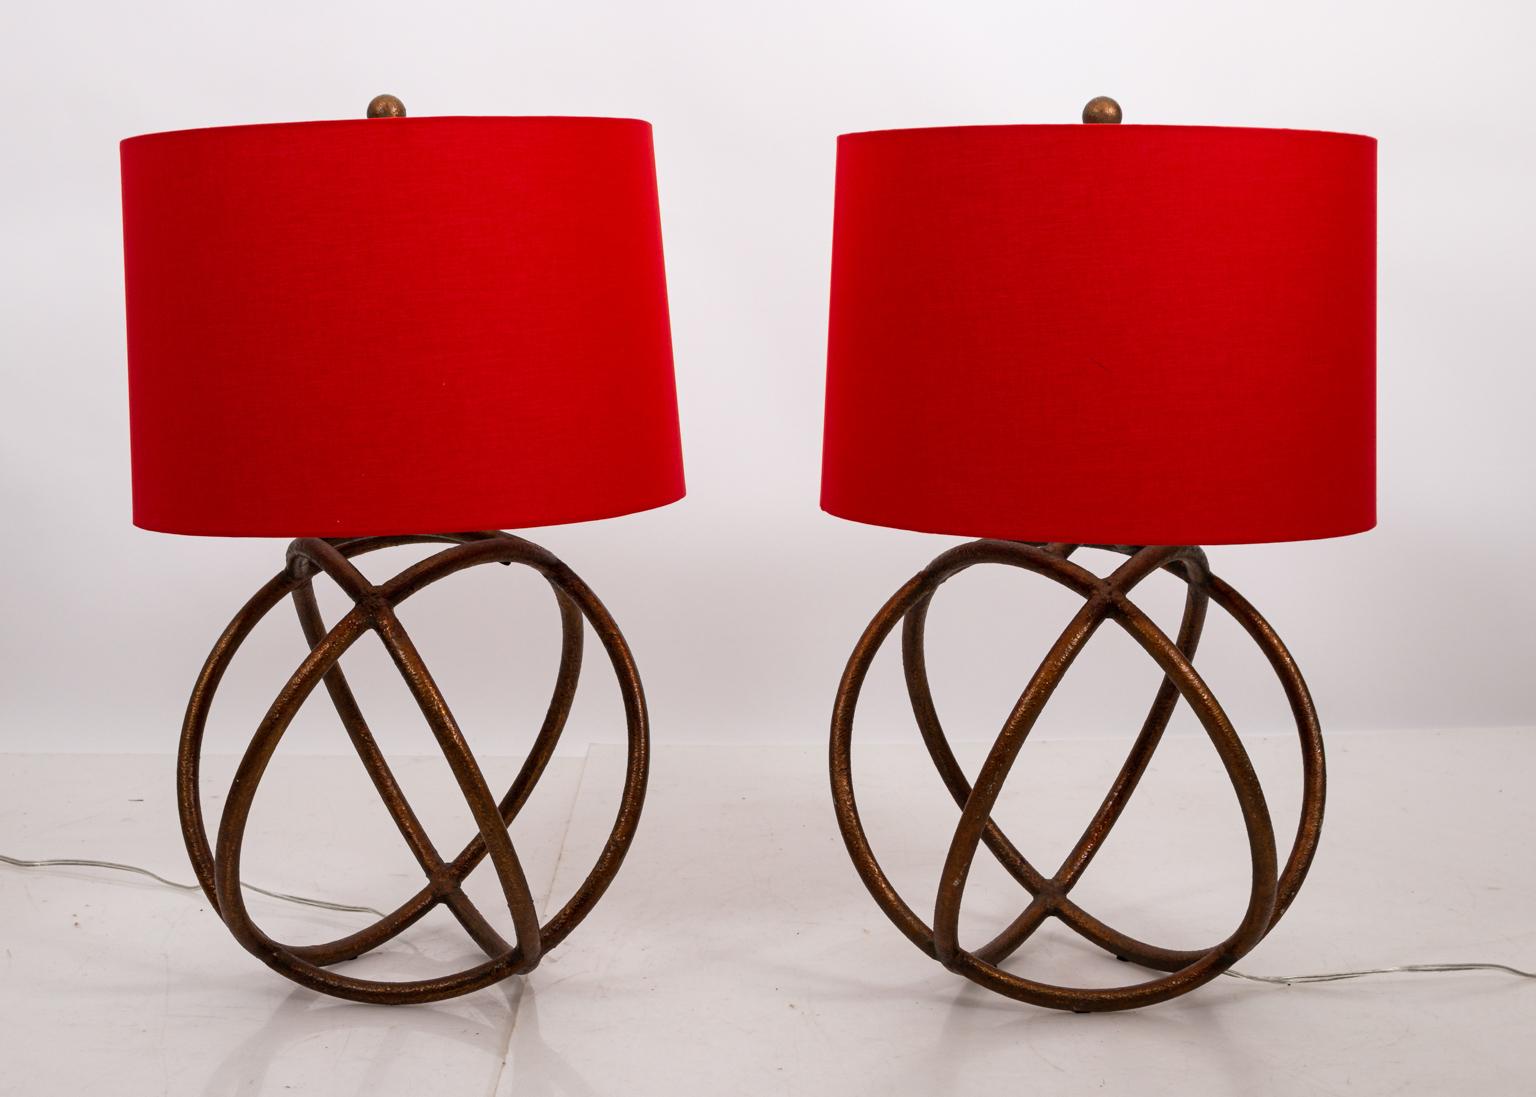 Gilded Iron sphere shaped table lamps in the modern style, circa 20th century. Please note of wear consistent with age. Red shades are not included.